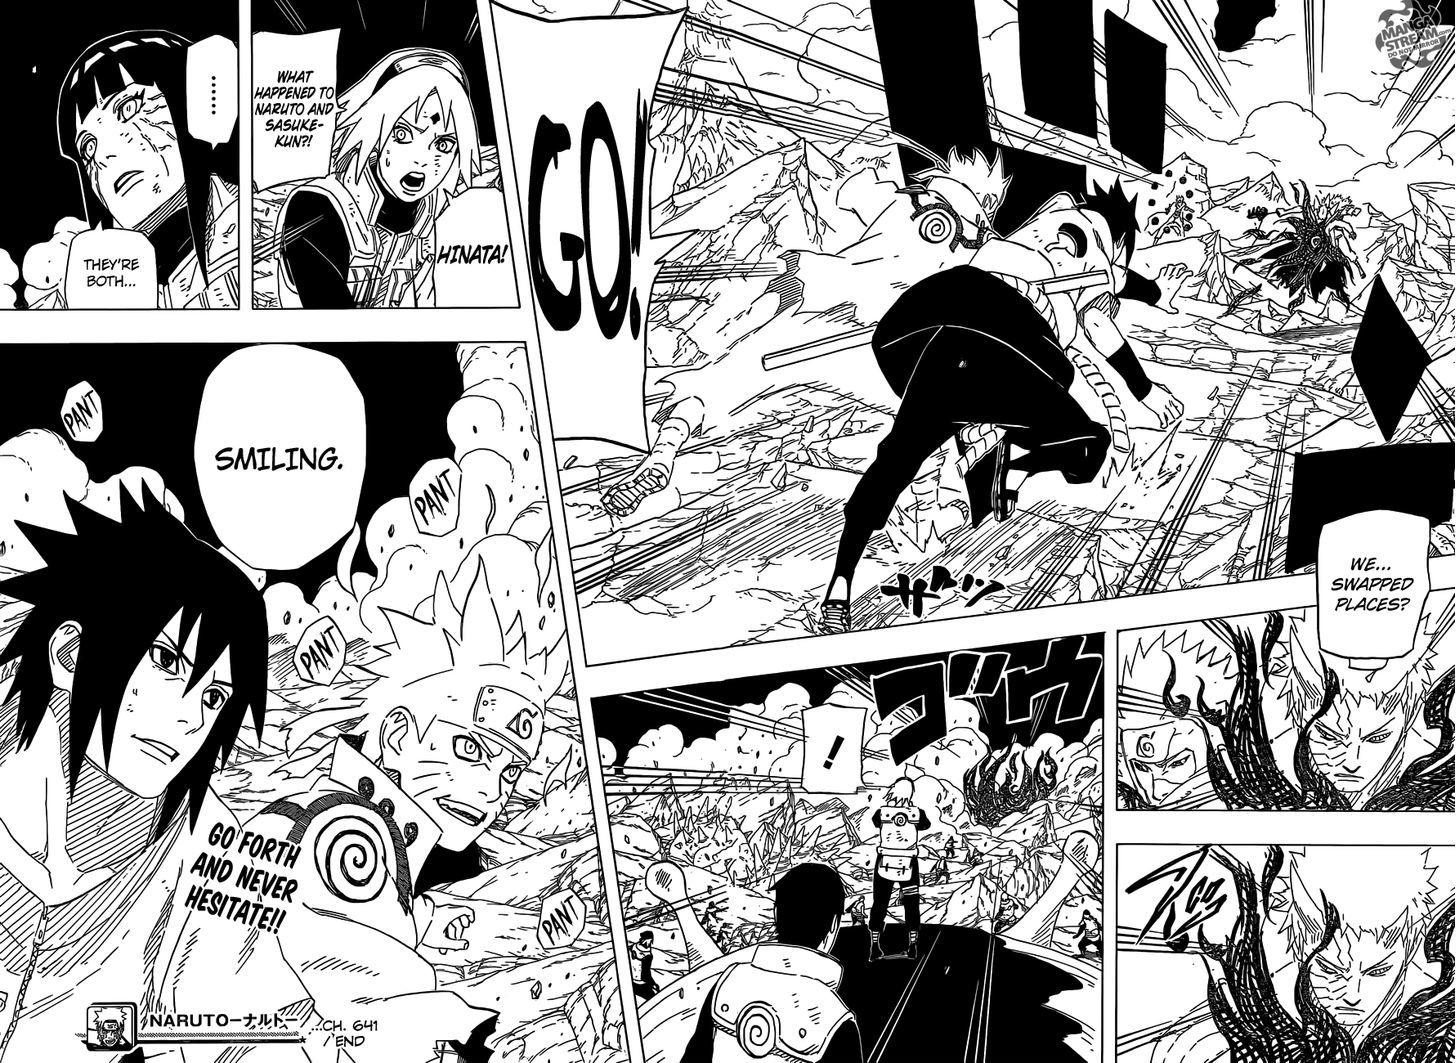 Vol.67 Chapter 641 – You Guys are the Main!! | 12 page